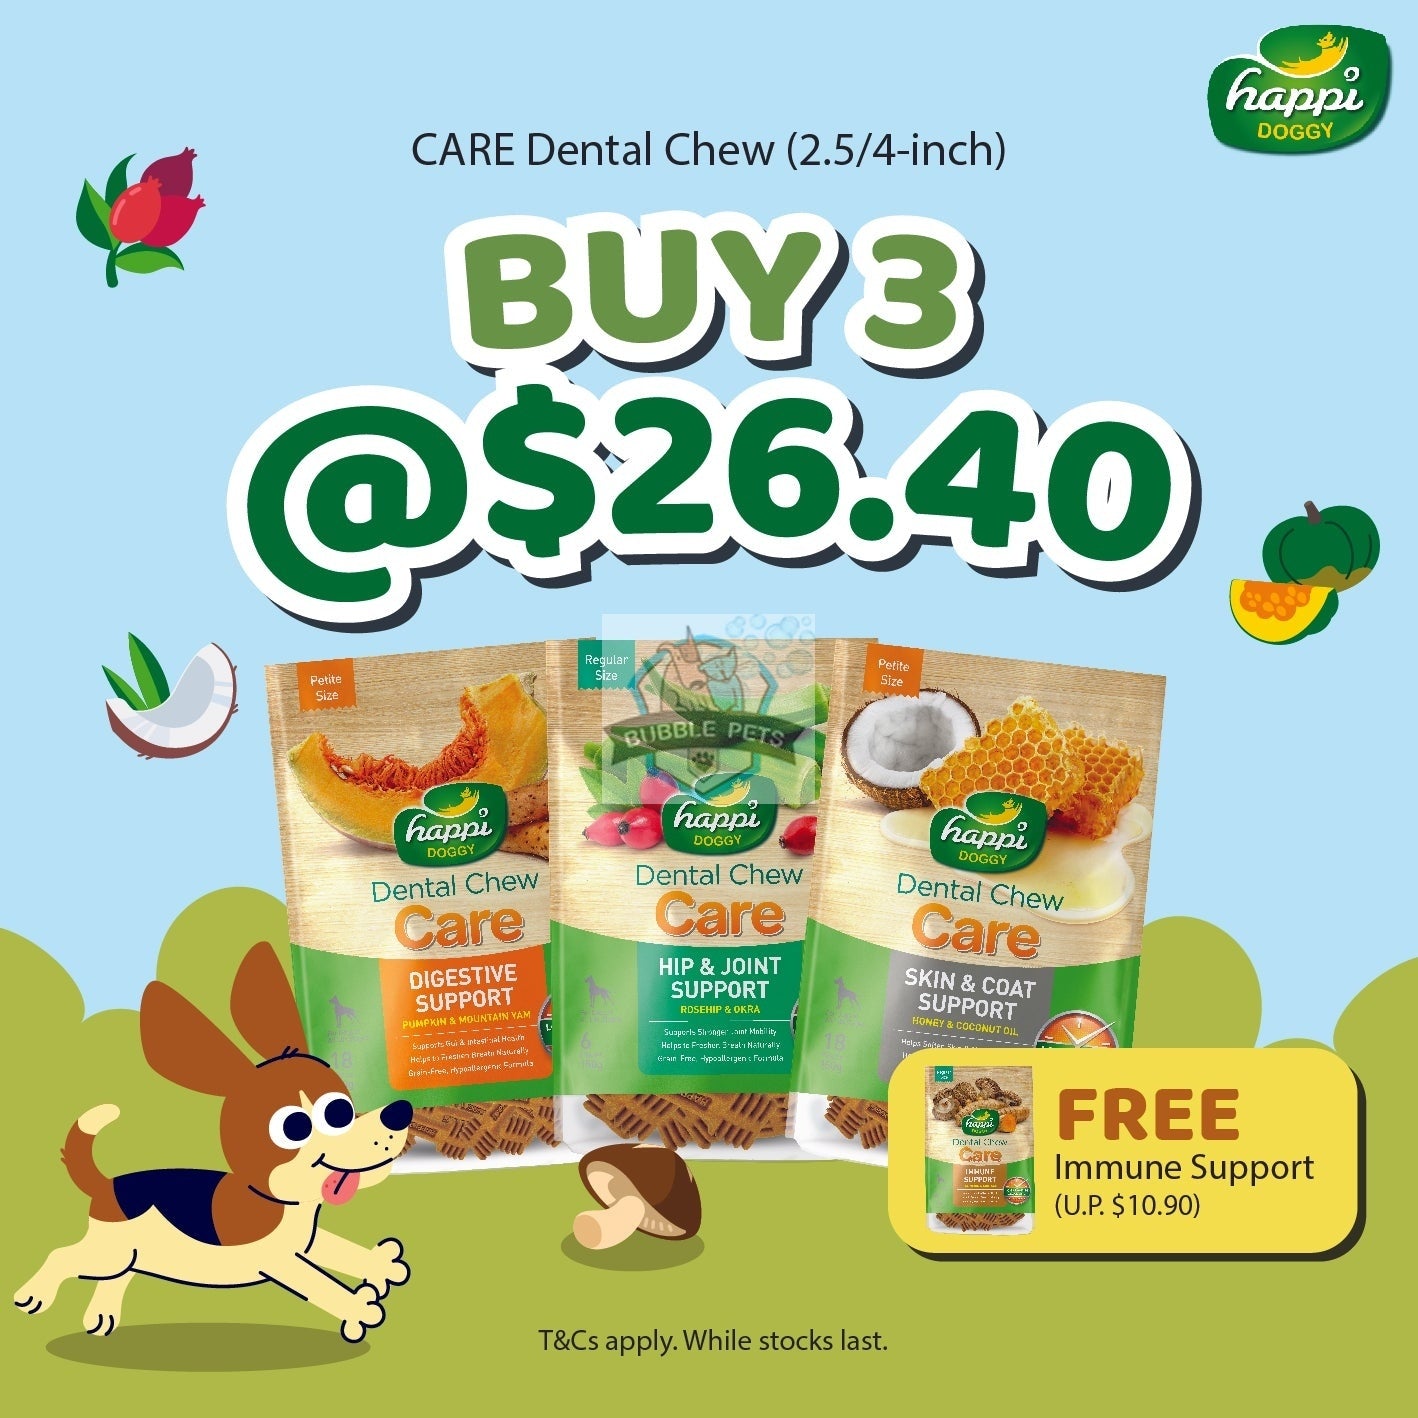 PROMO: Happi Doggy Buy 3 Care Dental Chews Free 1 Care Pouch (Immune)